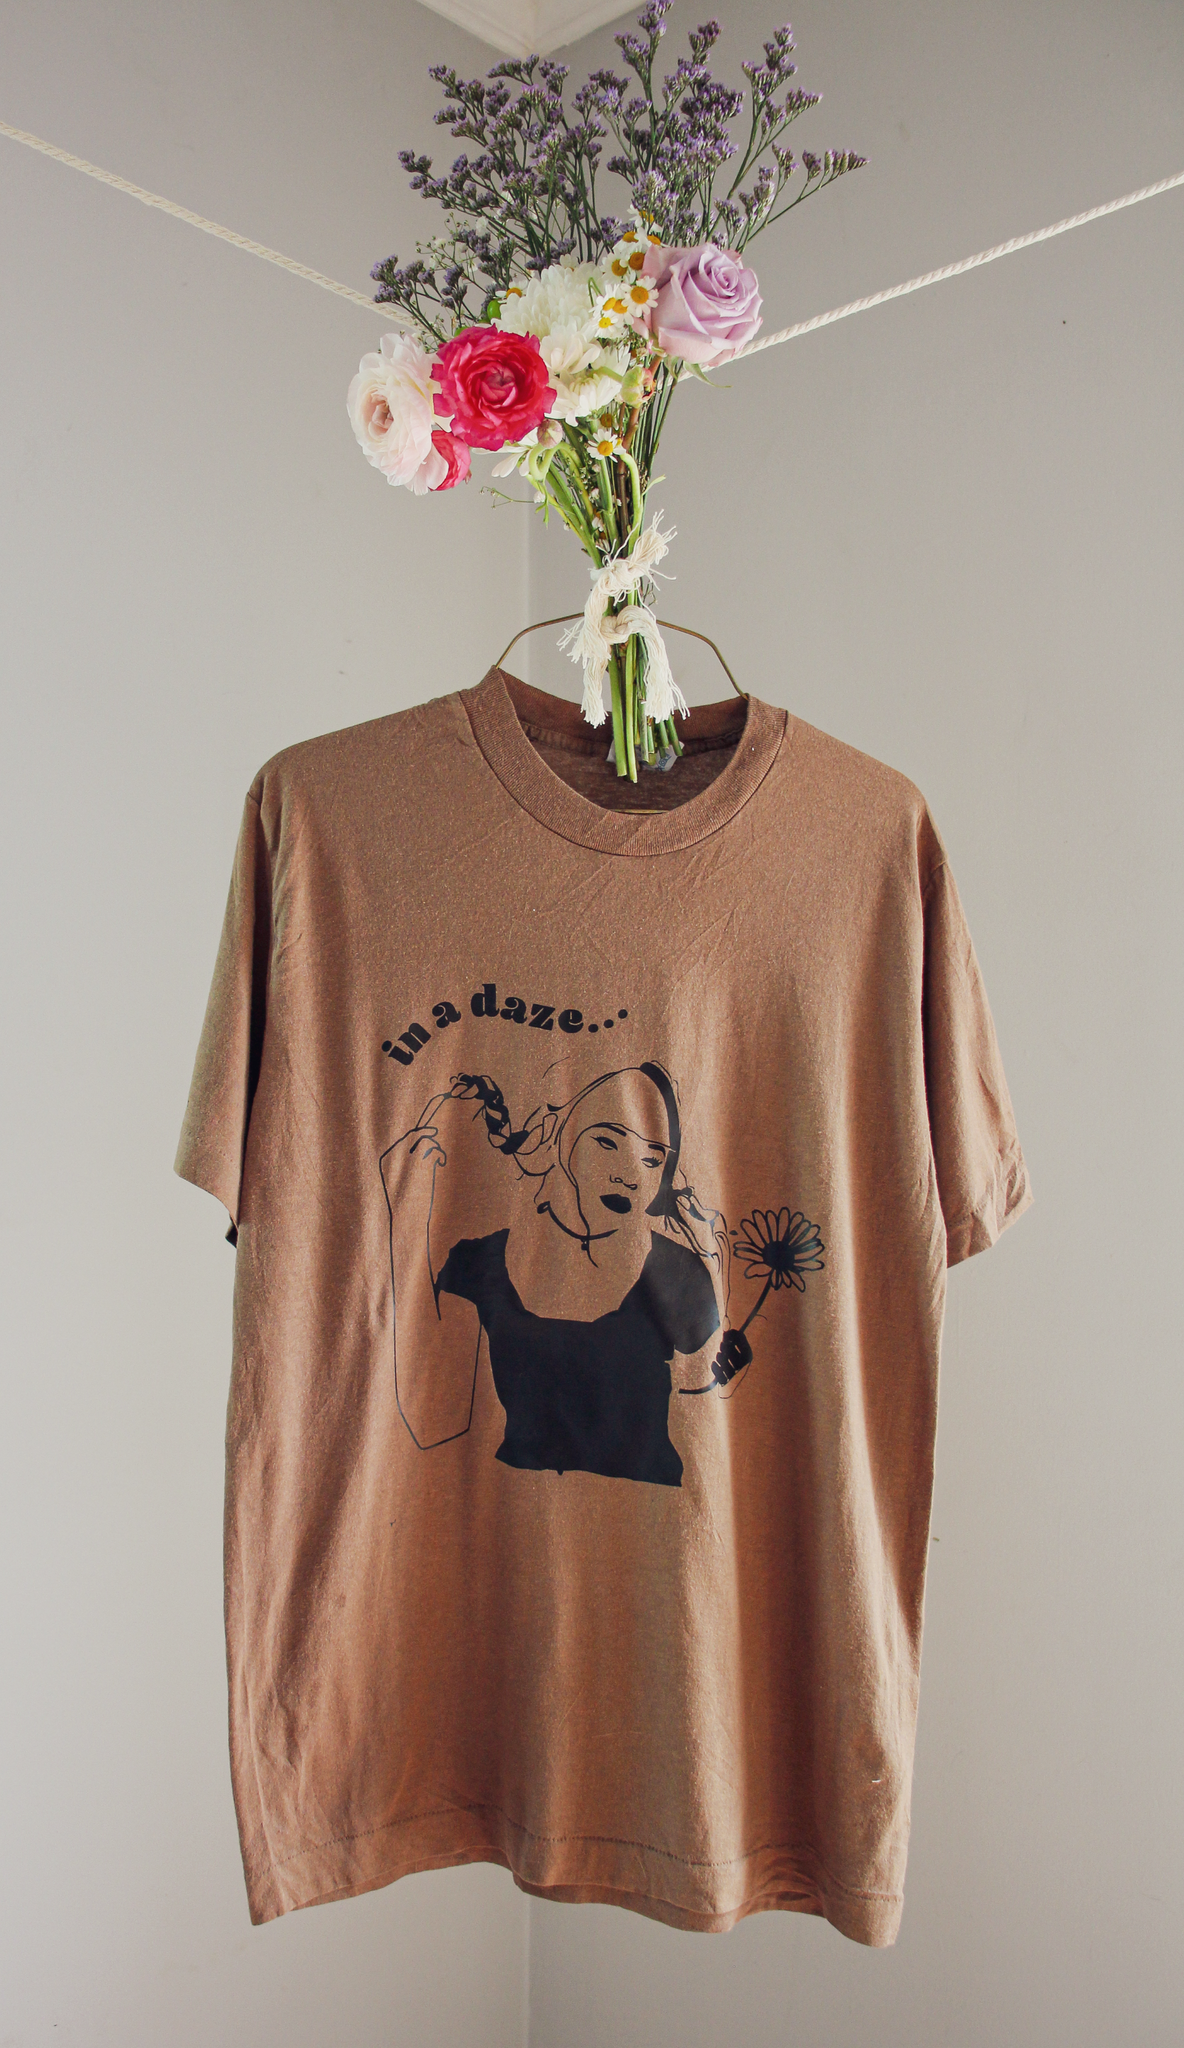 A brown t-shirt with a black illustration of a girl holding a flower and text that reads "in a daze....," hanging on a wire hanger with a bouquet of flowers tied to it